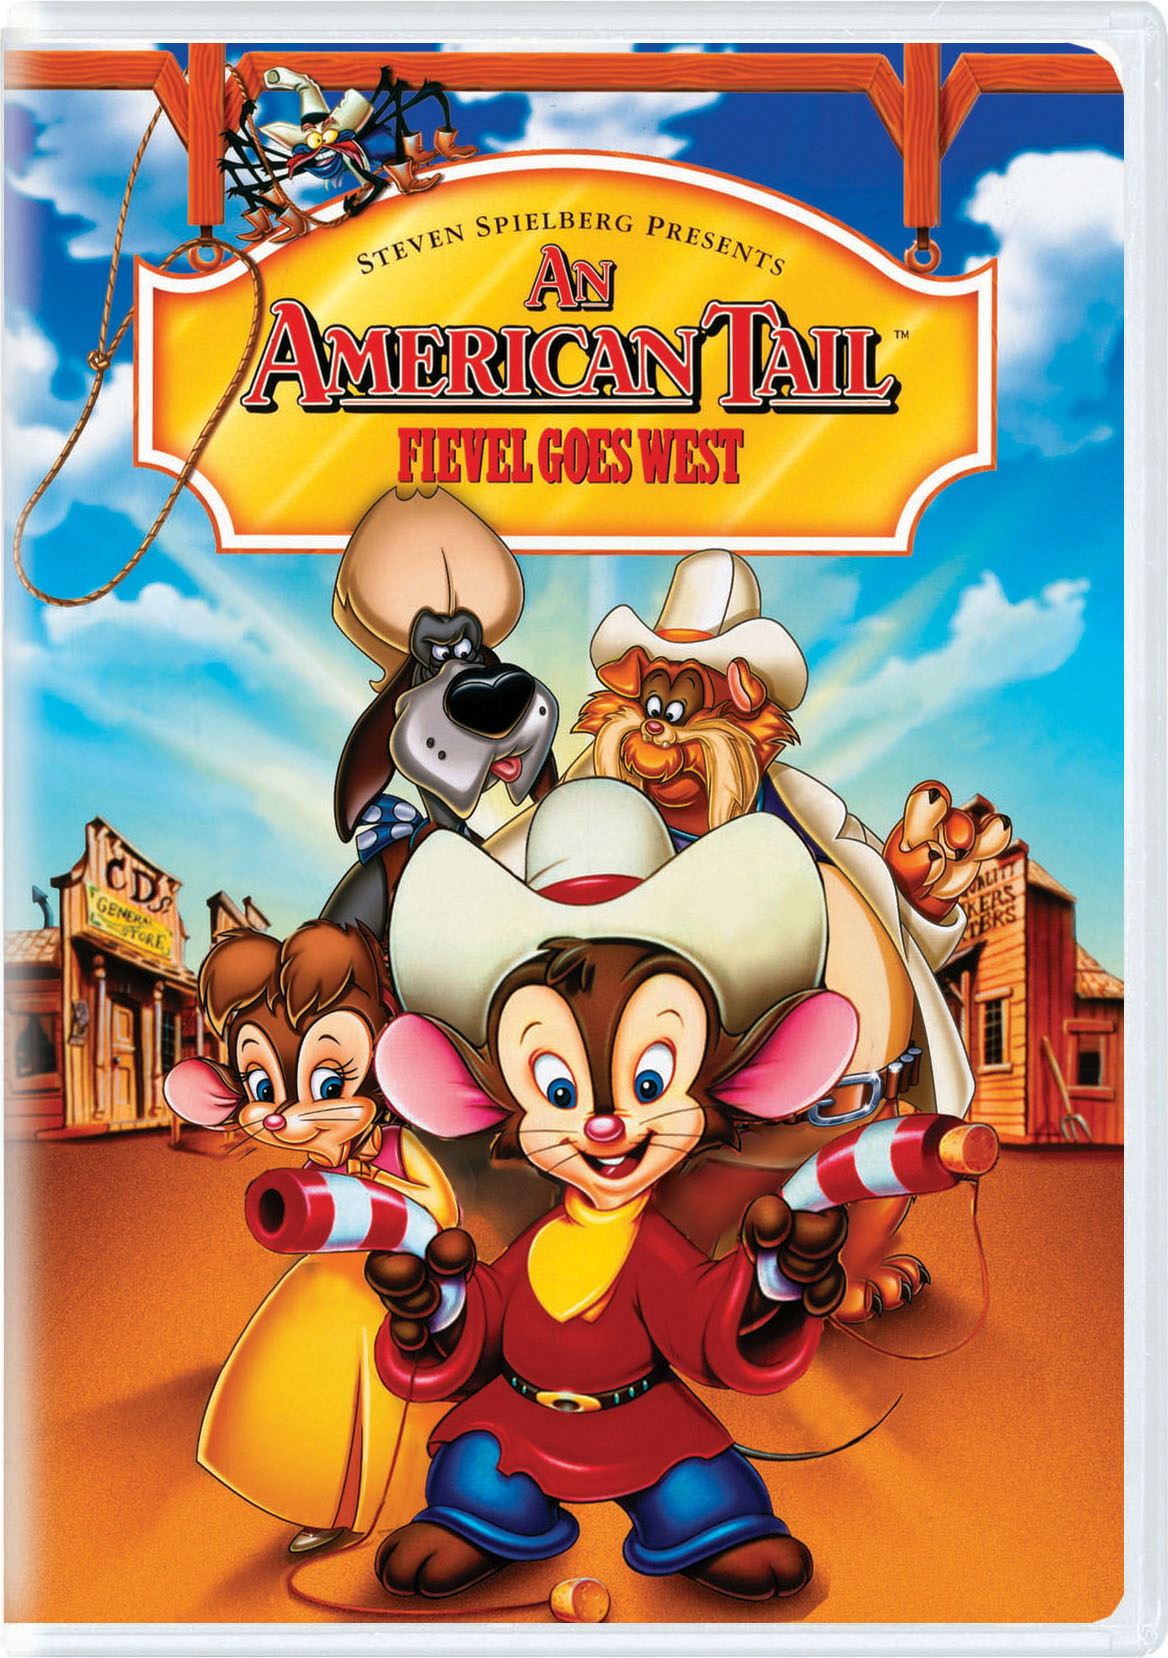 An American Tail: Fievel Goes West (1991) - DVD [ 1991 ]  - Children Movies On DVD - Movies On GRUV